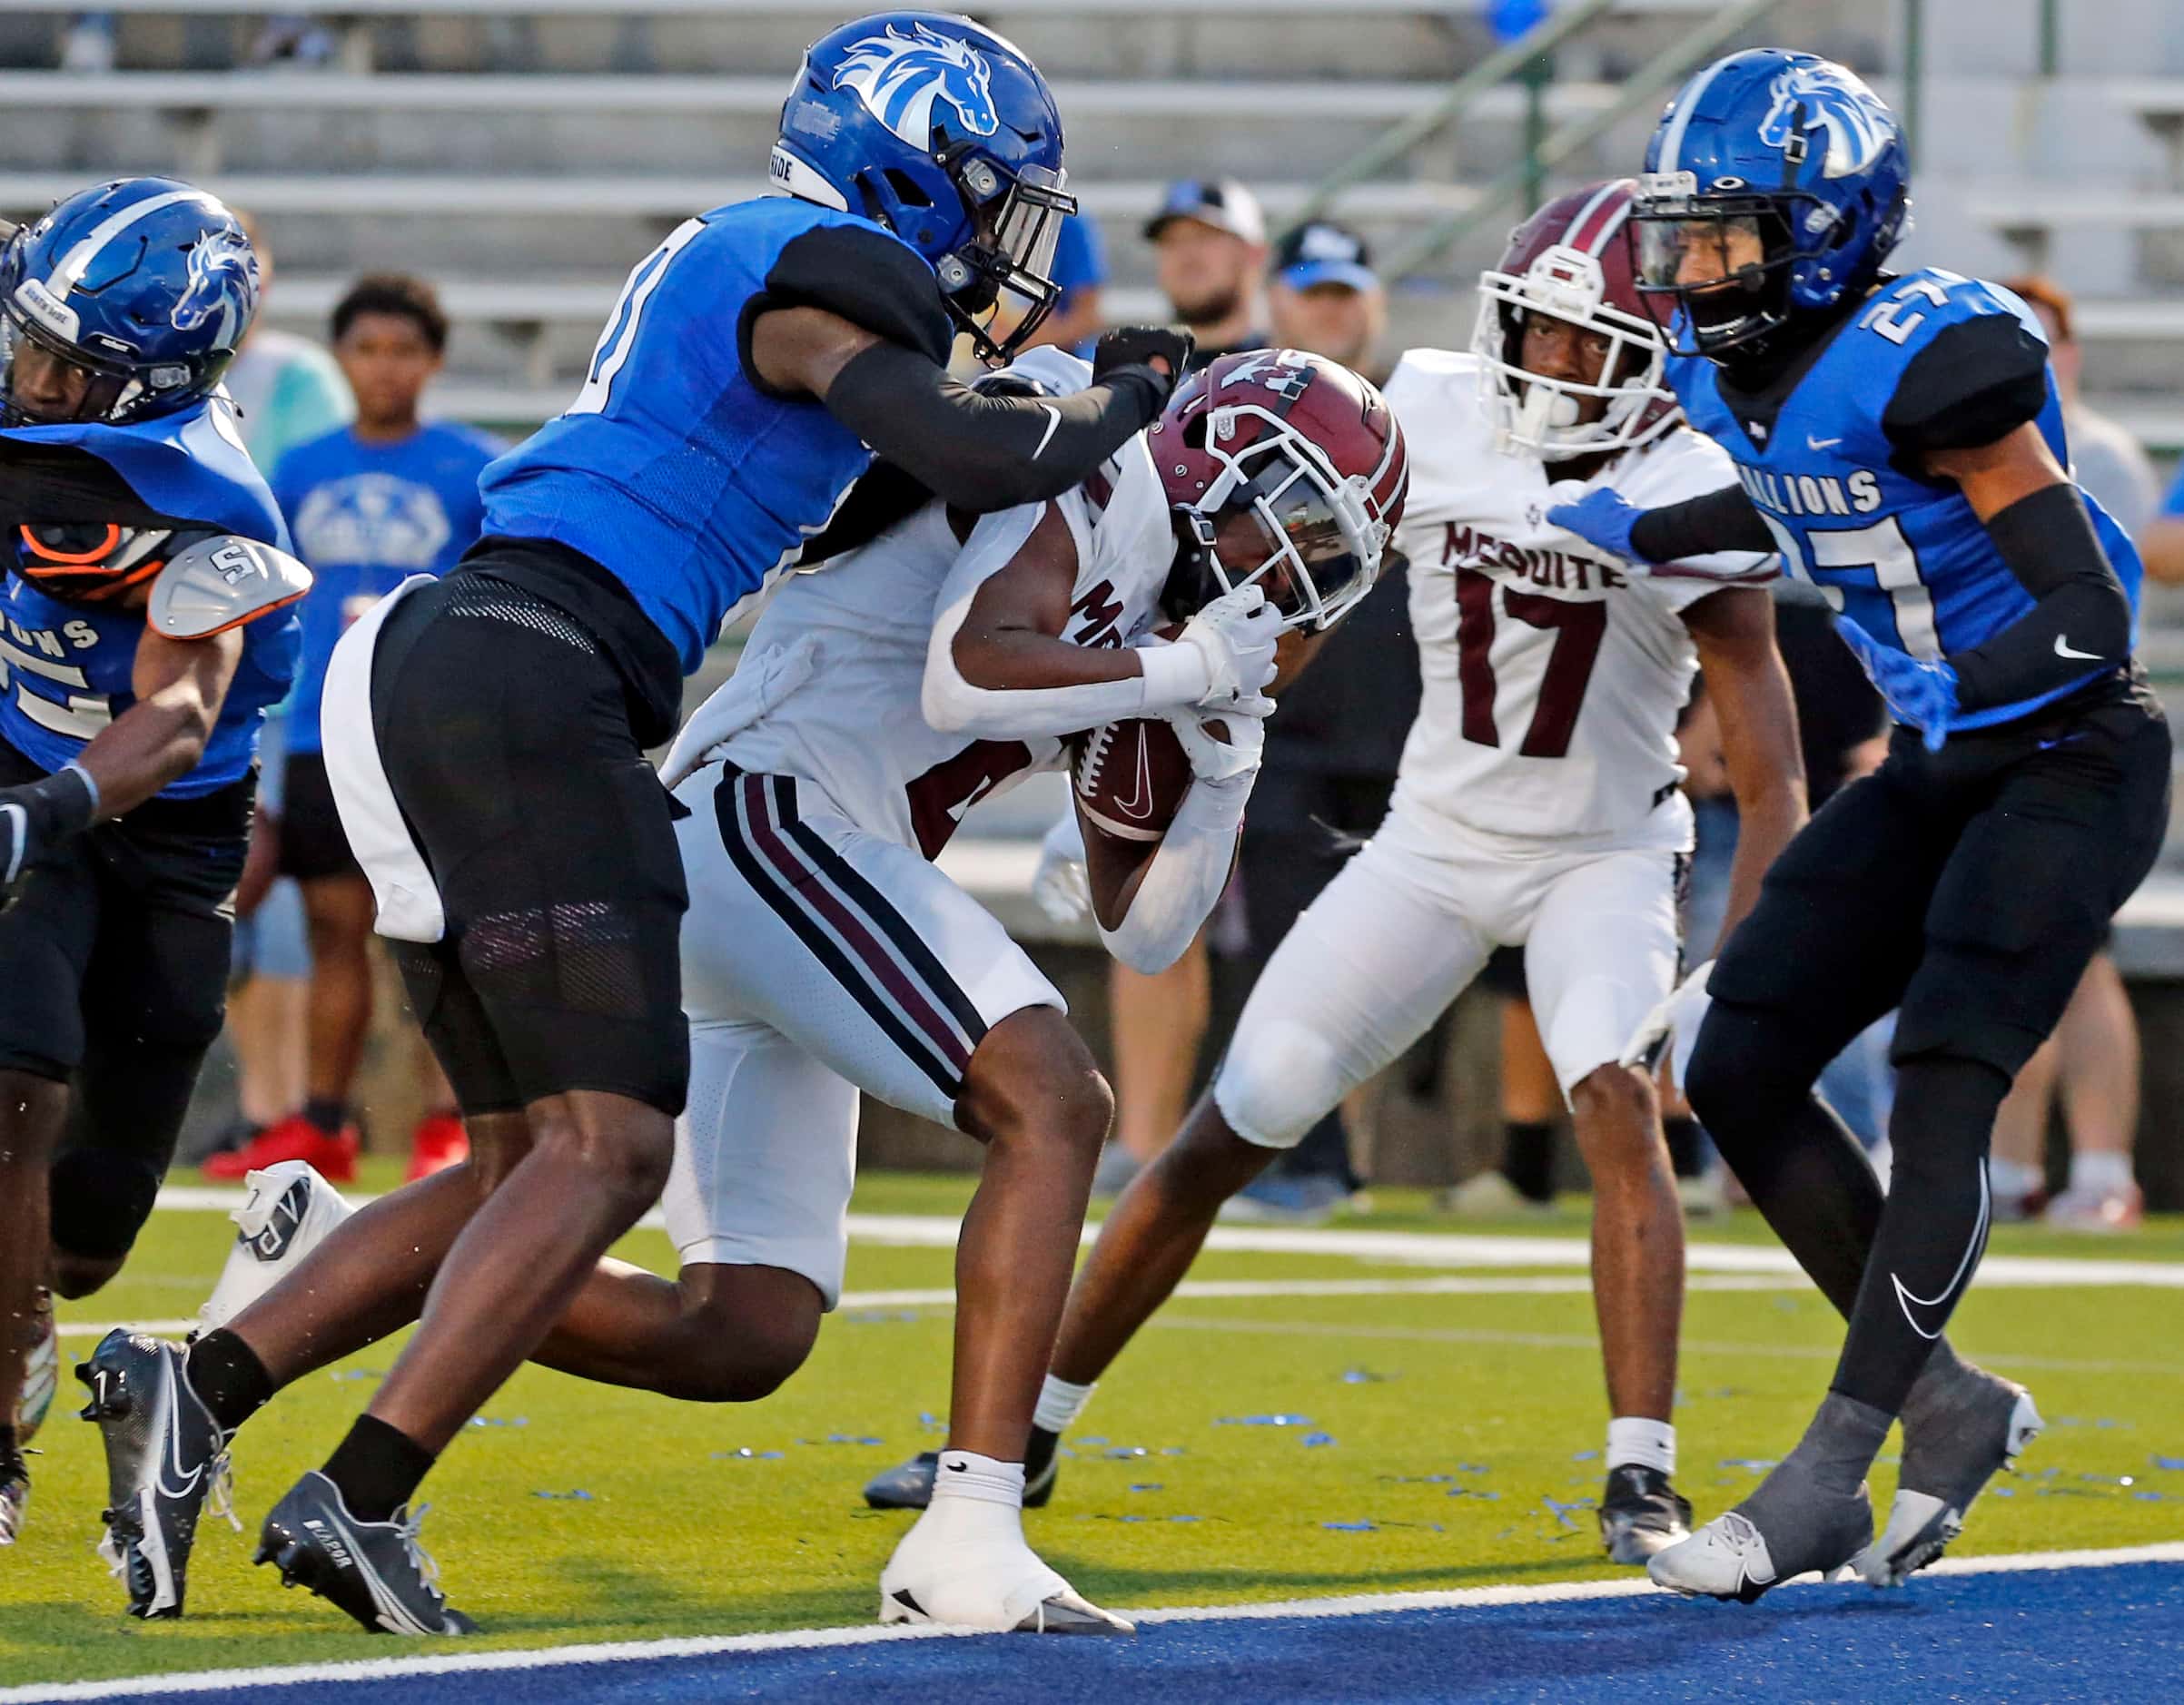 Mesquite High’s Armand Cleaver (6) scores a touchdown in a crowd during the first half of a...